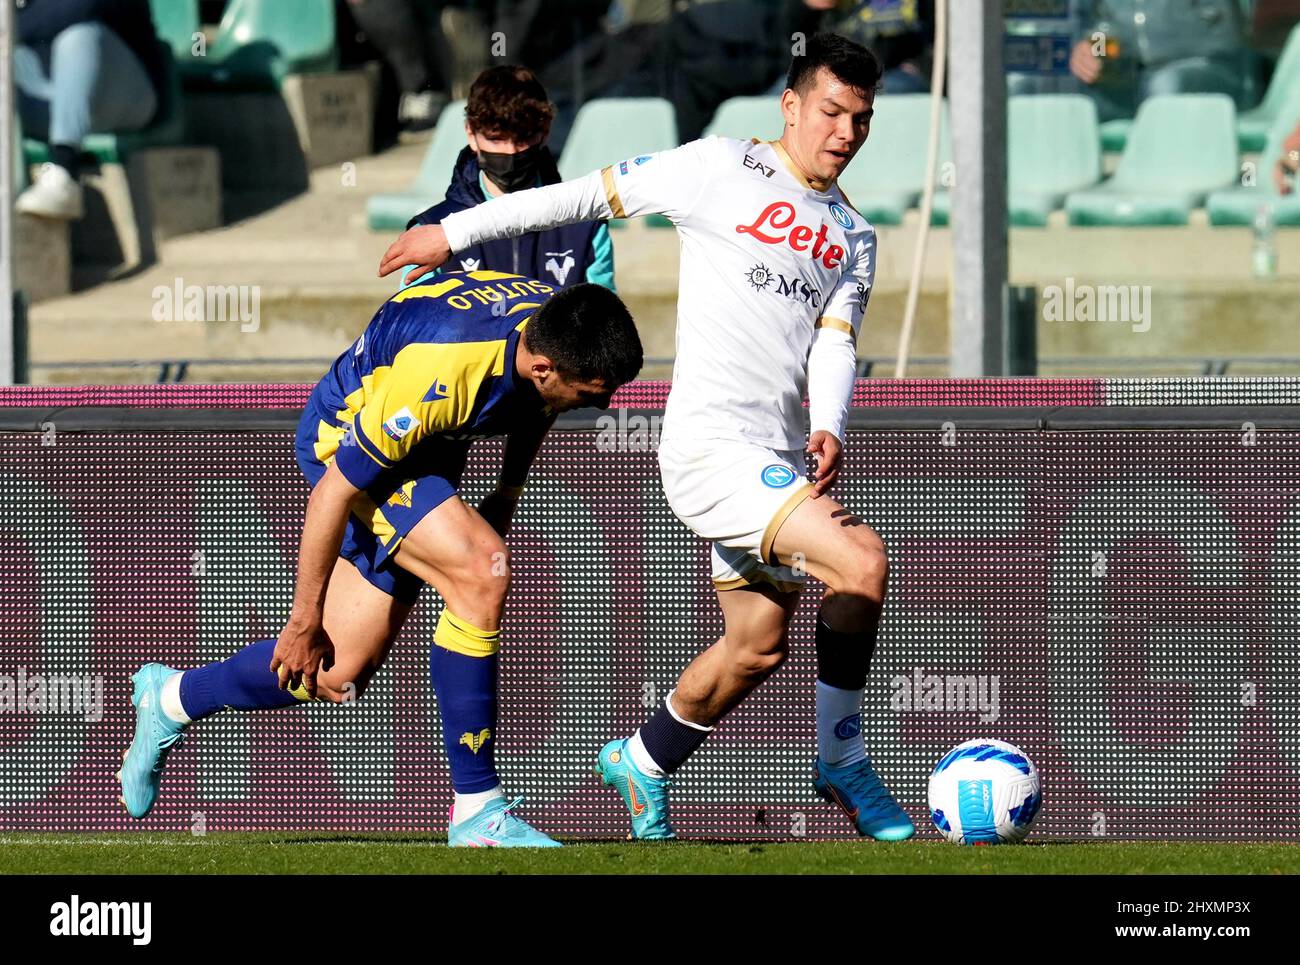 VERONA, ITALY - MARCH 13: Hirving Lozano of SSc Napoli competes for the ball with Bosko Sutalo of Hellas Verona ,during the Serie A match between Hellas and SSC Napoli at Stadio Marcantonio Bentegodi on March 13, 2022 in Verona, Italy. (Photo by MB Media) Stock Photo